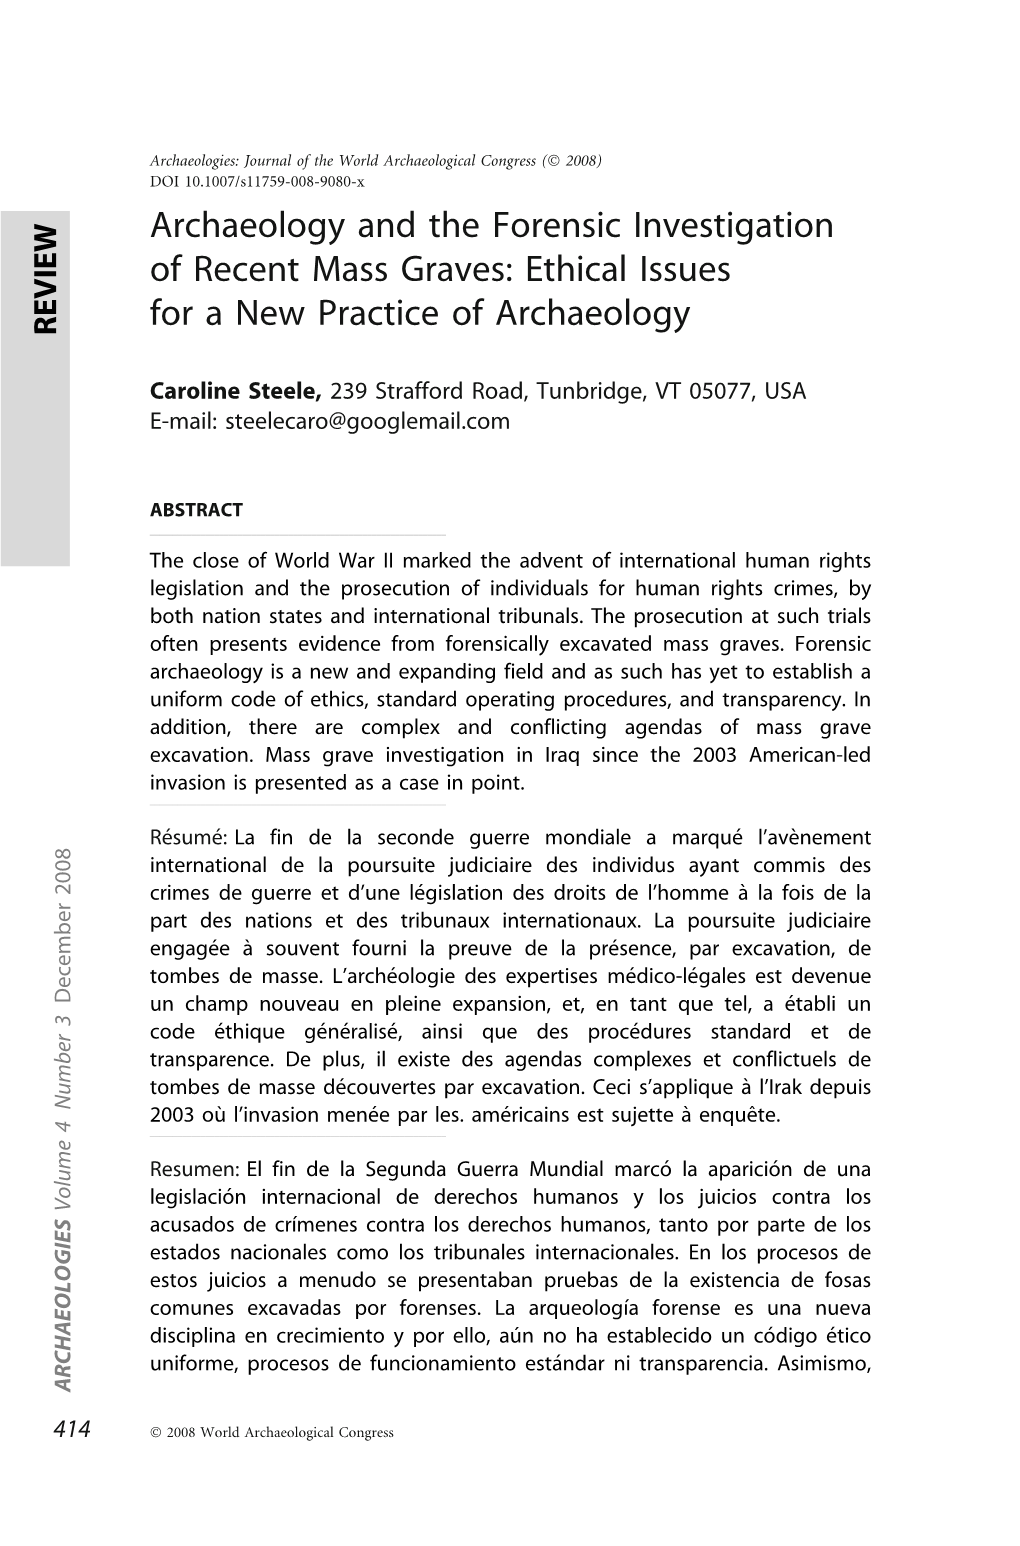 Archaeology and the Forensic Investigation of Recent Mass Graves: Ethical Issues for a New Practice of Archaeology REVIEW